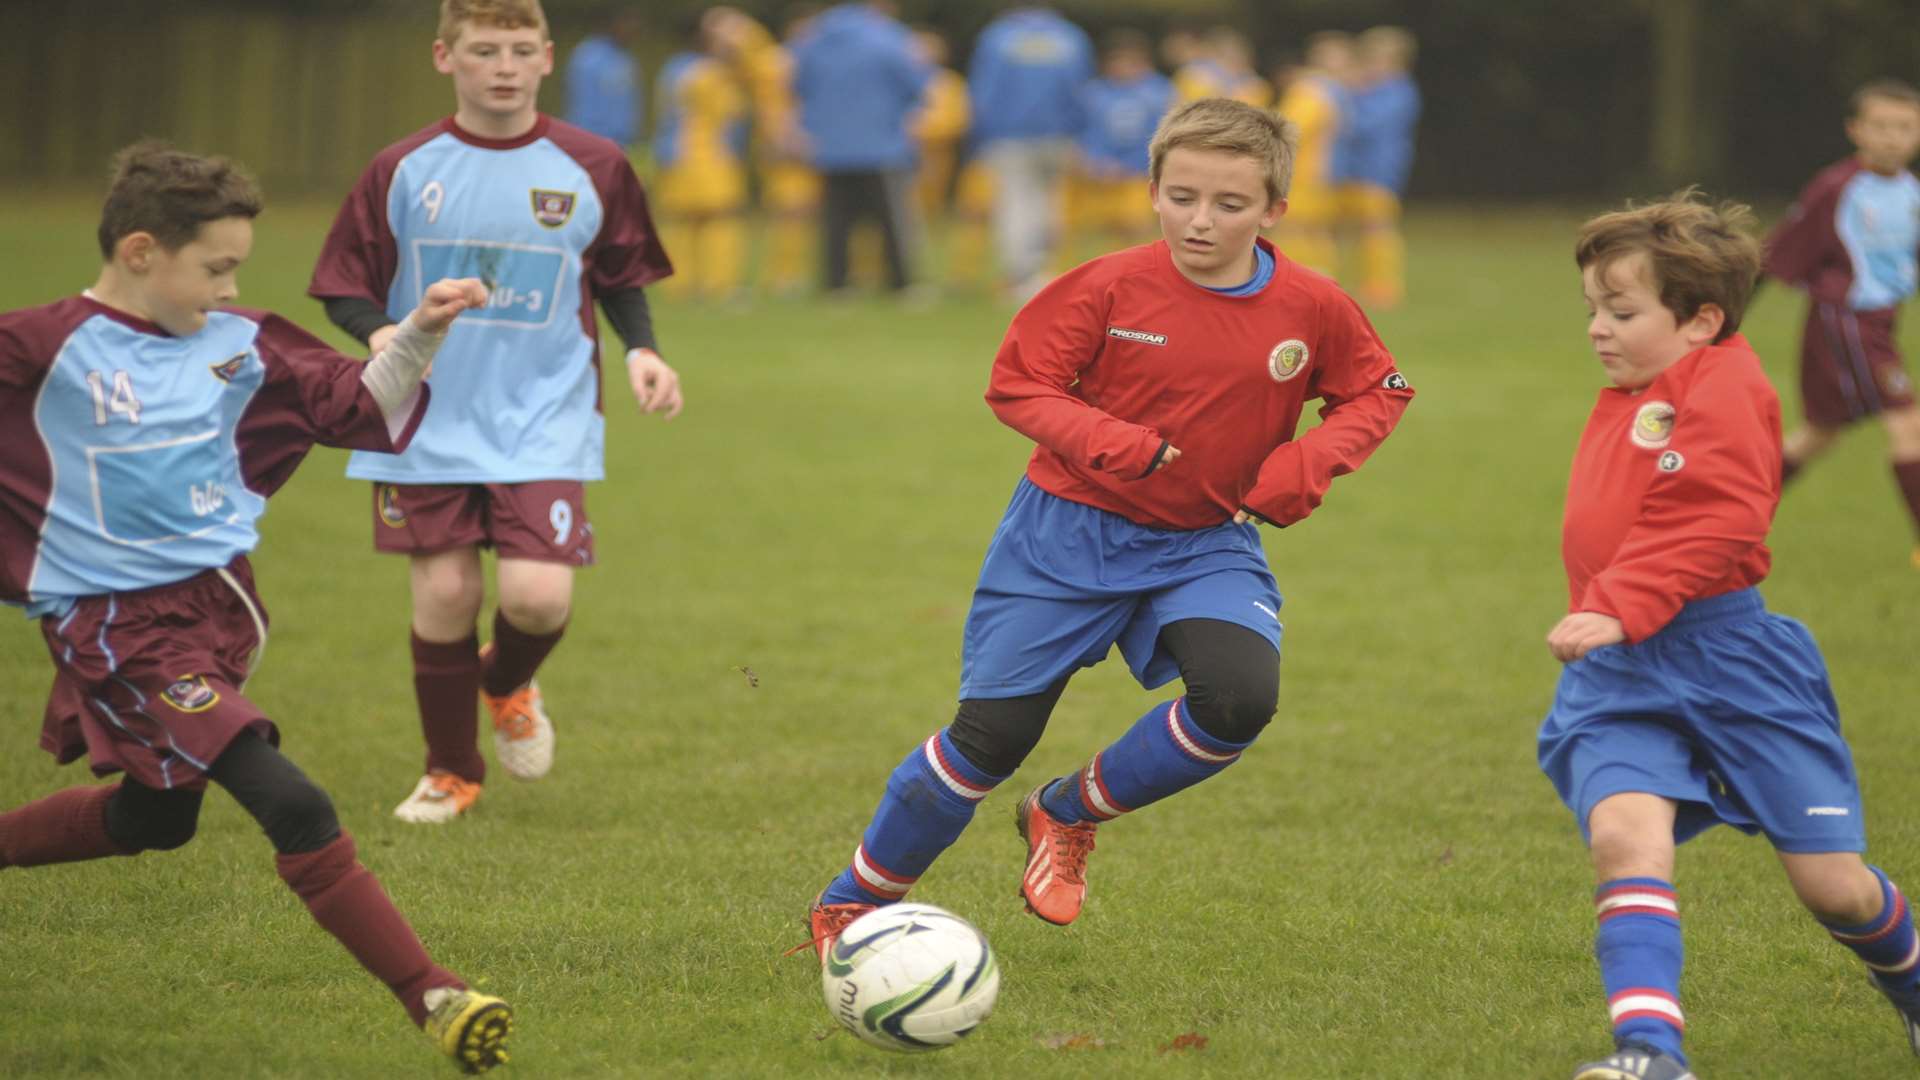 Wigmore Youth Whippets challenge Woodpecker HI in Under-11 Division 3 Picture: Steve Crispe